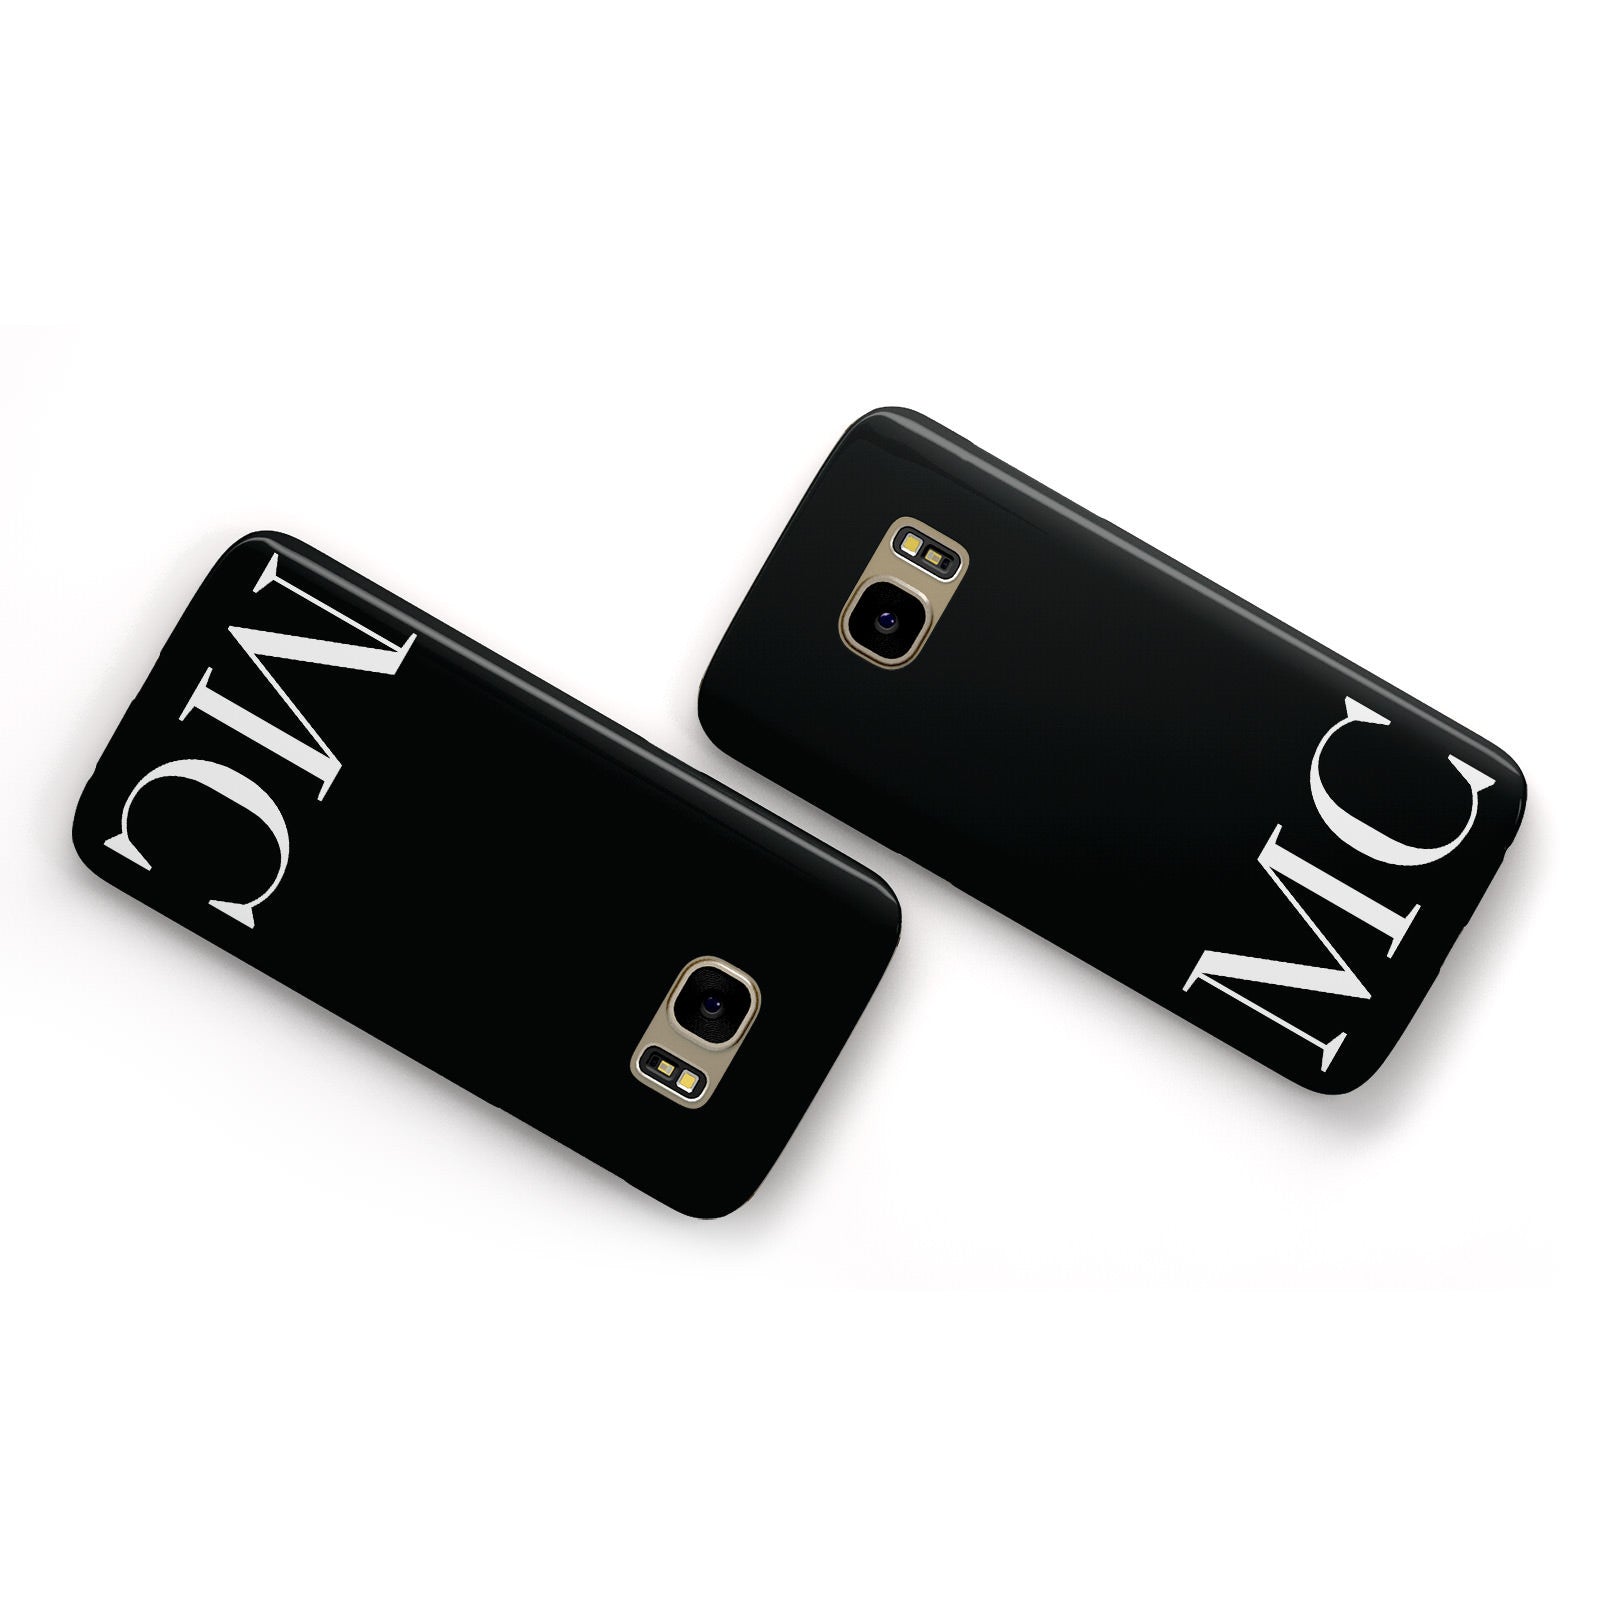 Initials Personalised 1 Samsung Galaxy Case Flat Overview